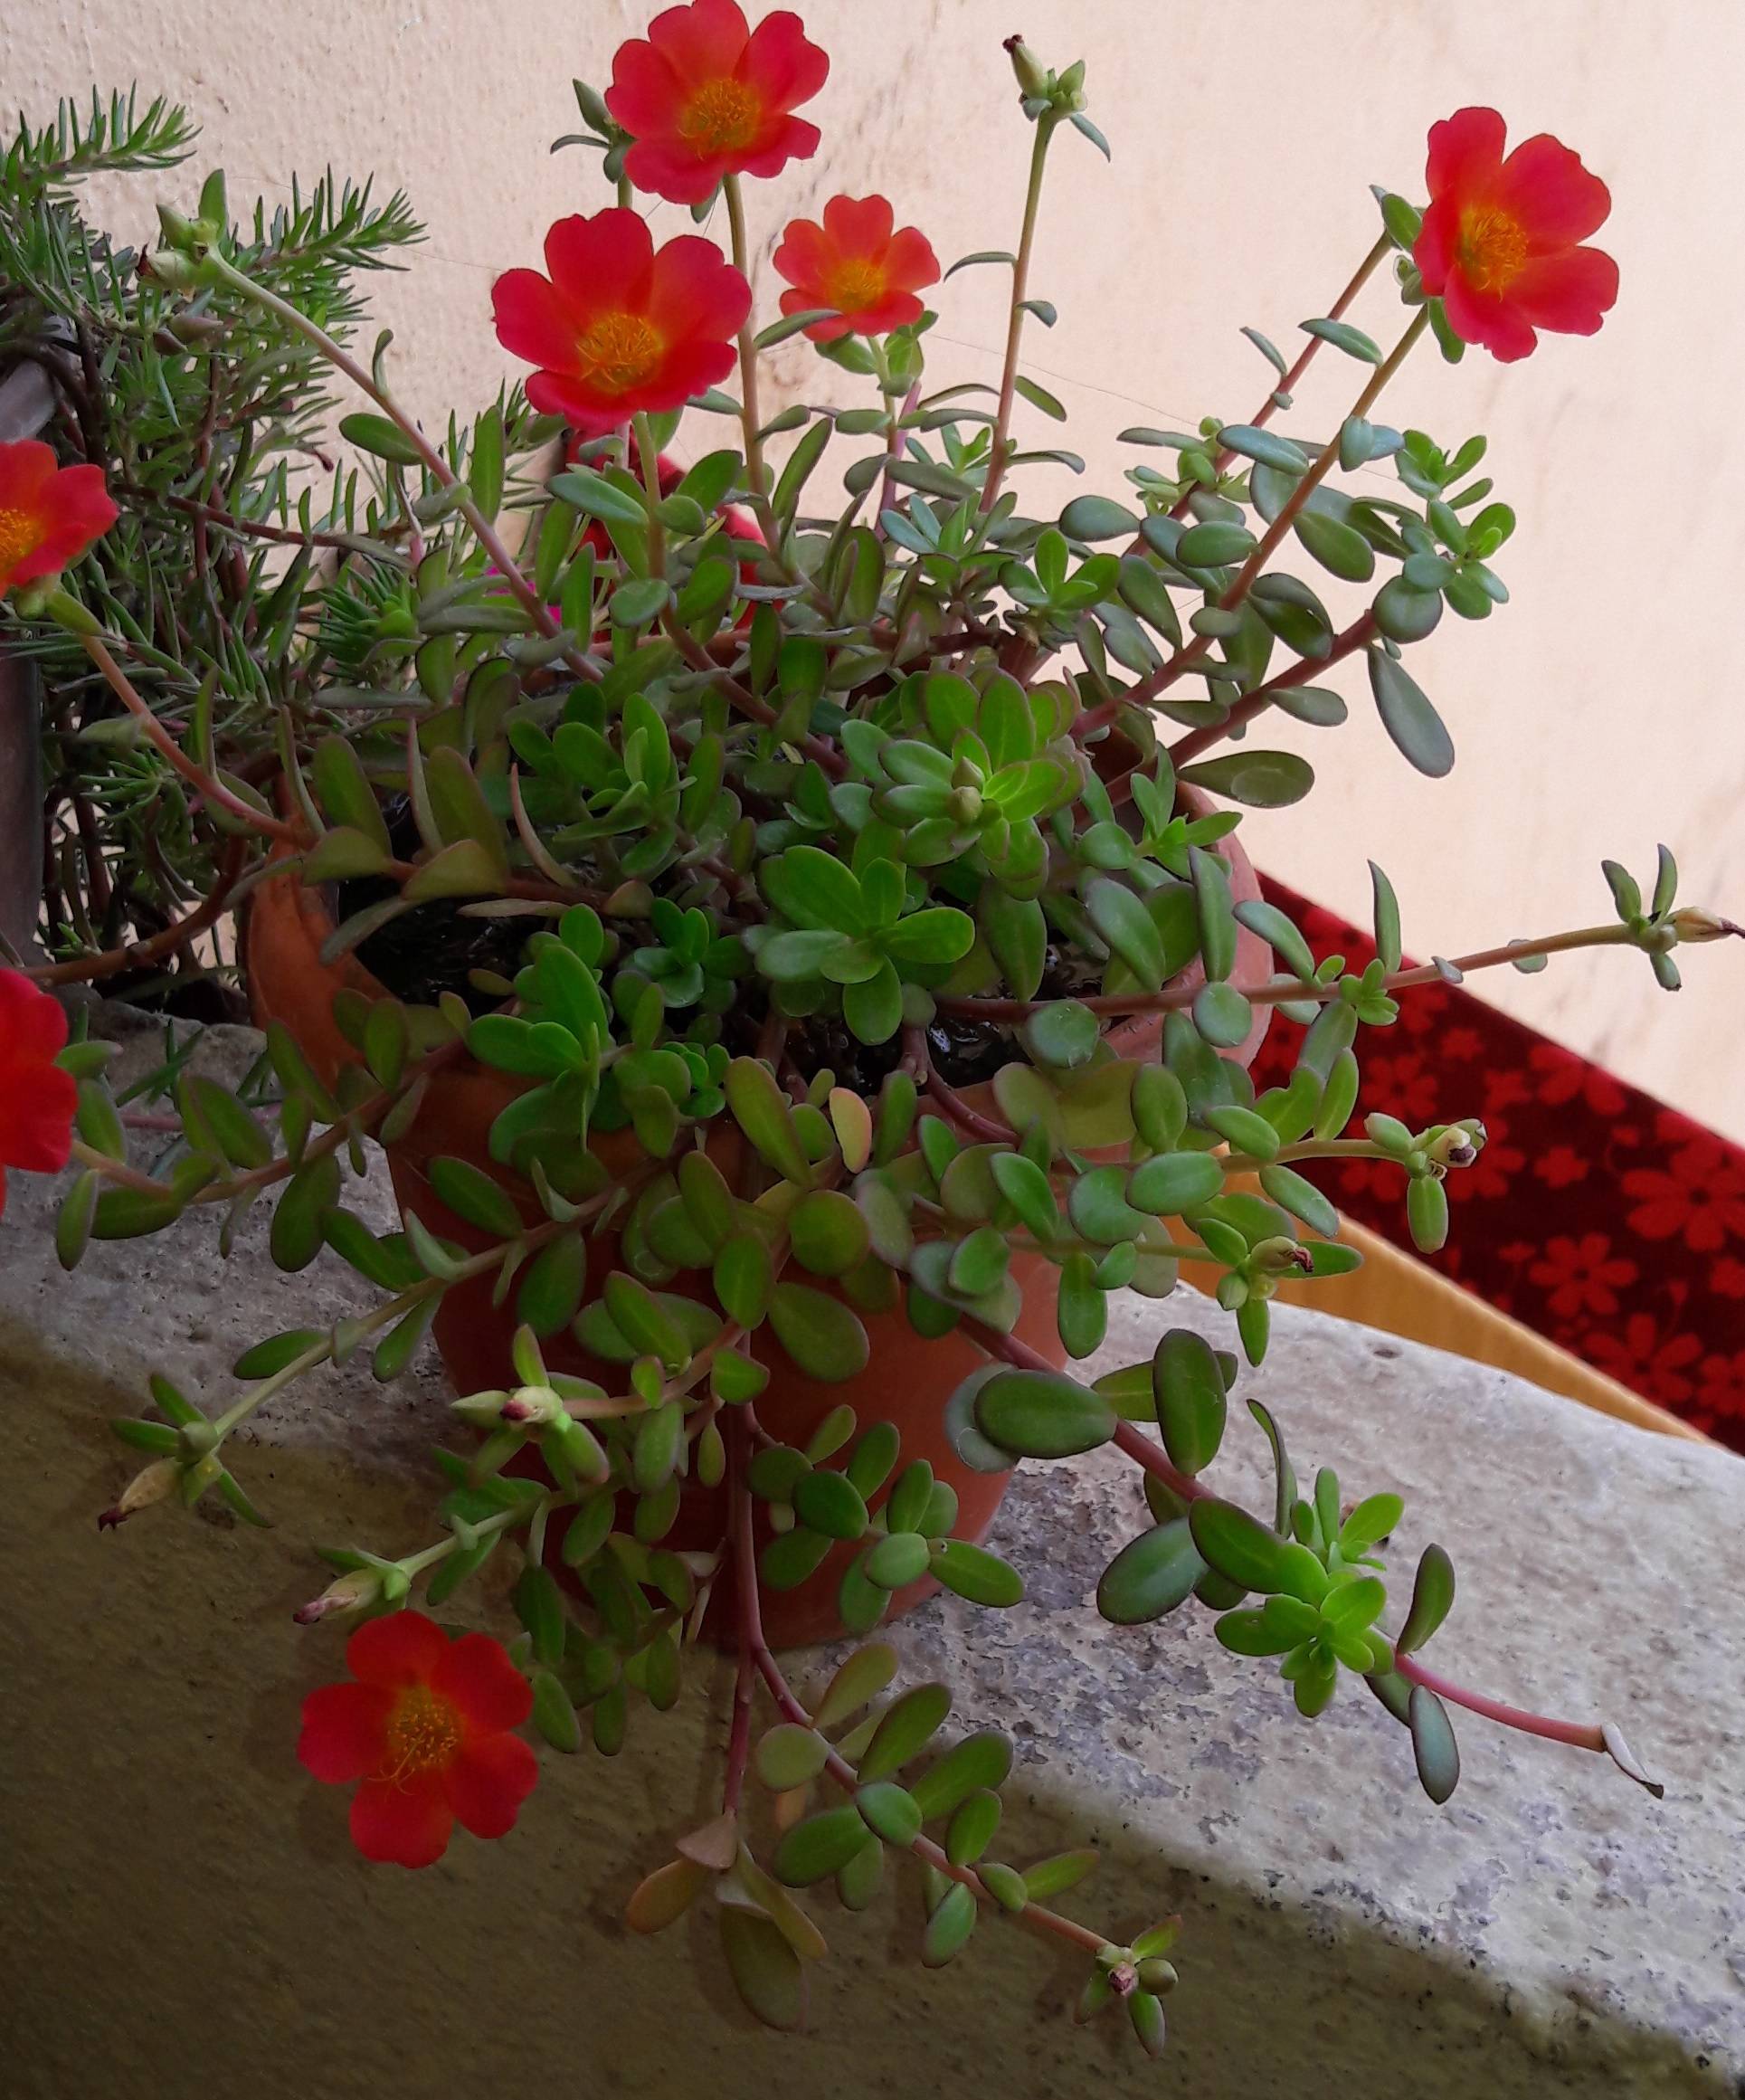 identification - What is this plant that has small red flowers and ...